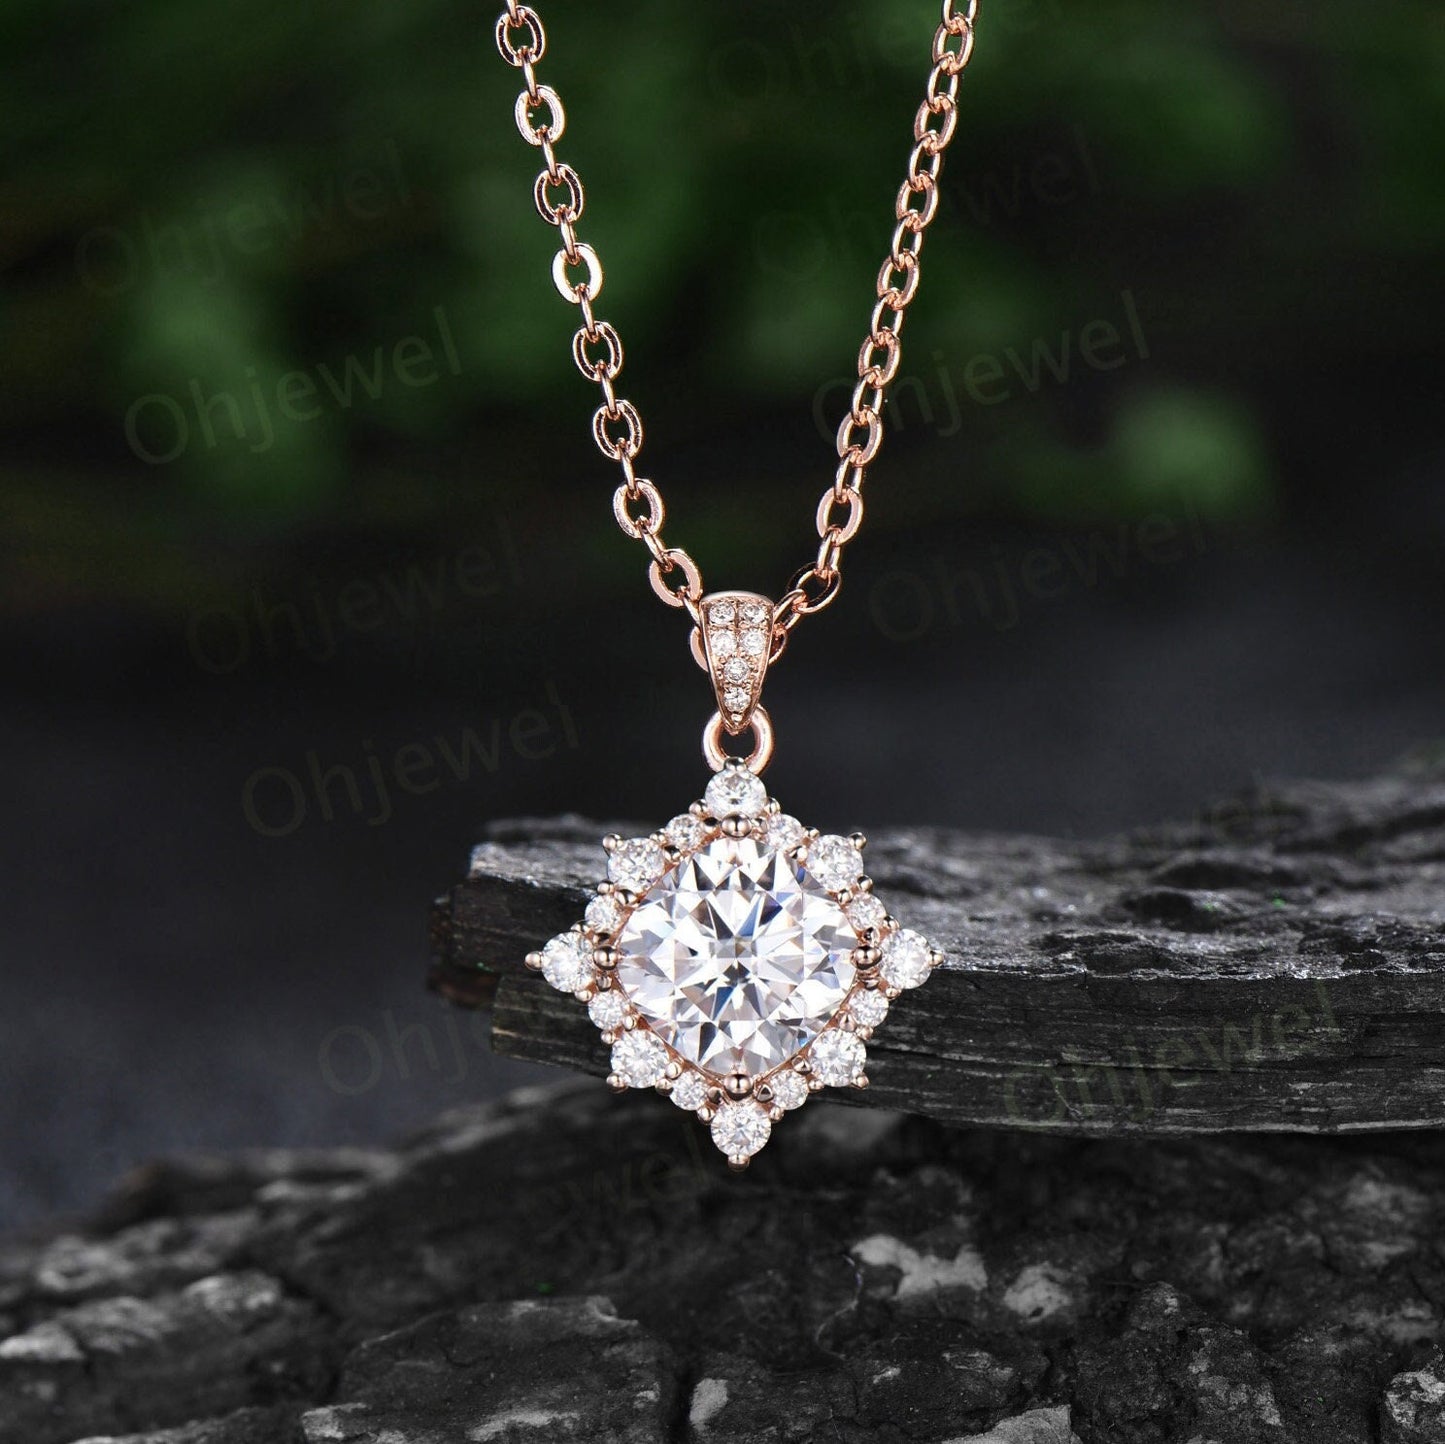 Cushion cut moissanite necklace solid 14k rose gold unique snowdrift halo diamond Pendant bridal wedding anniversary gift for women her